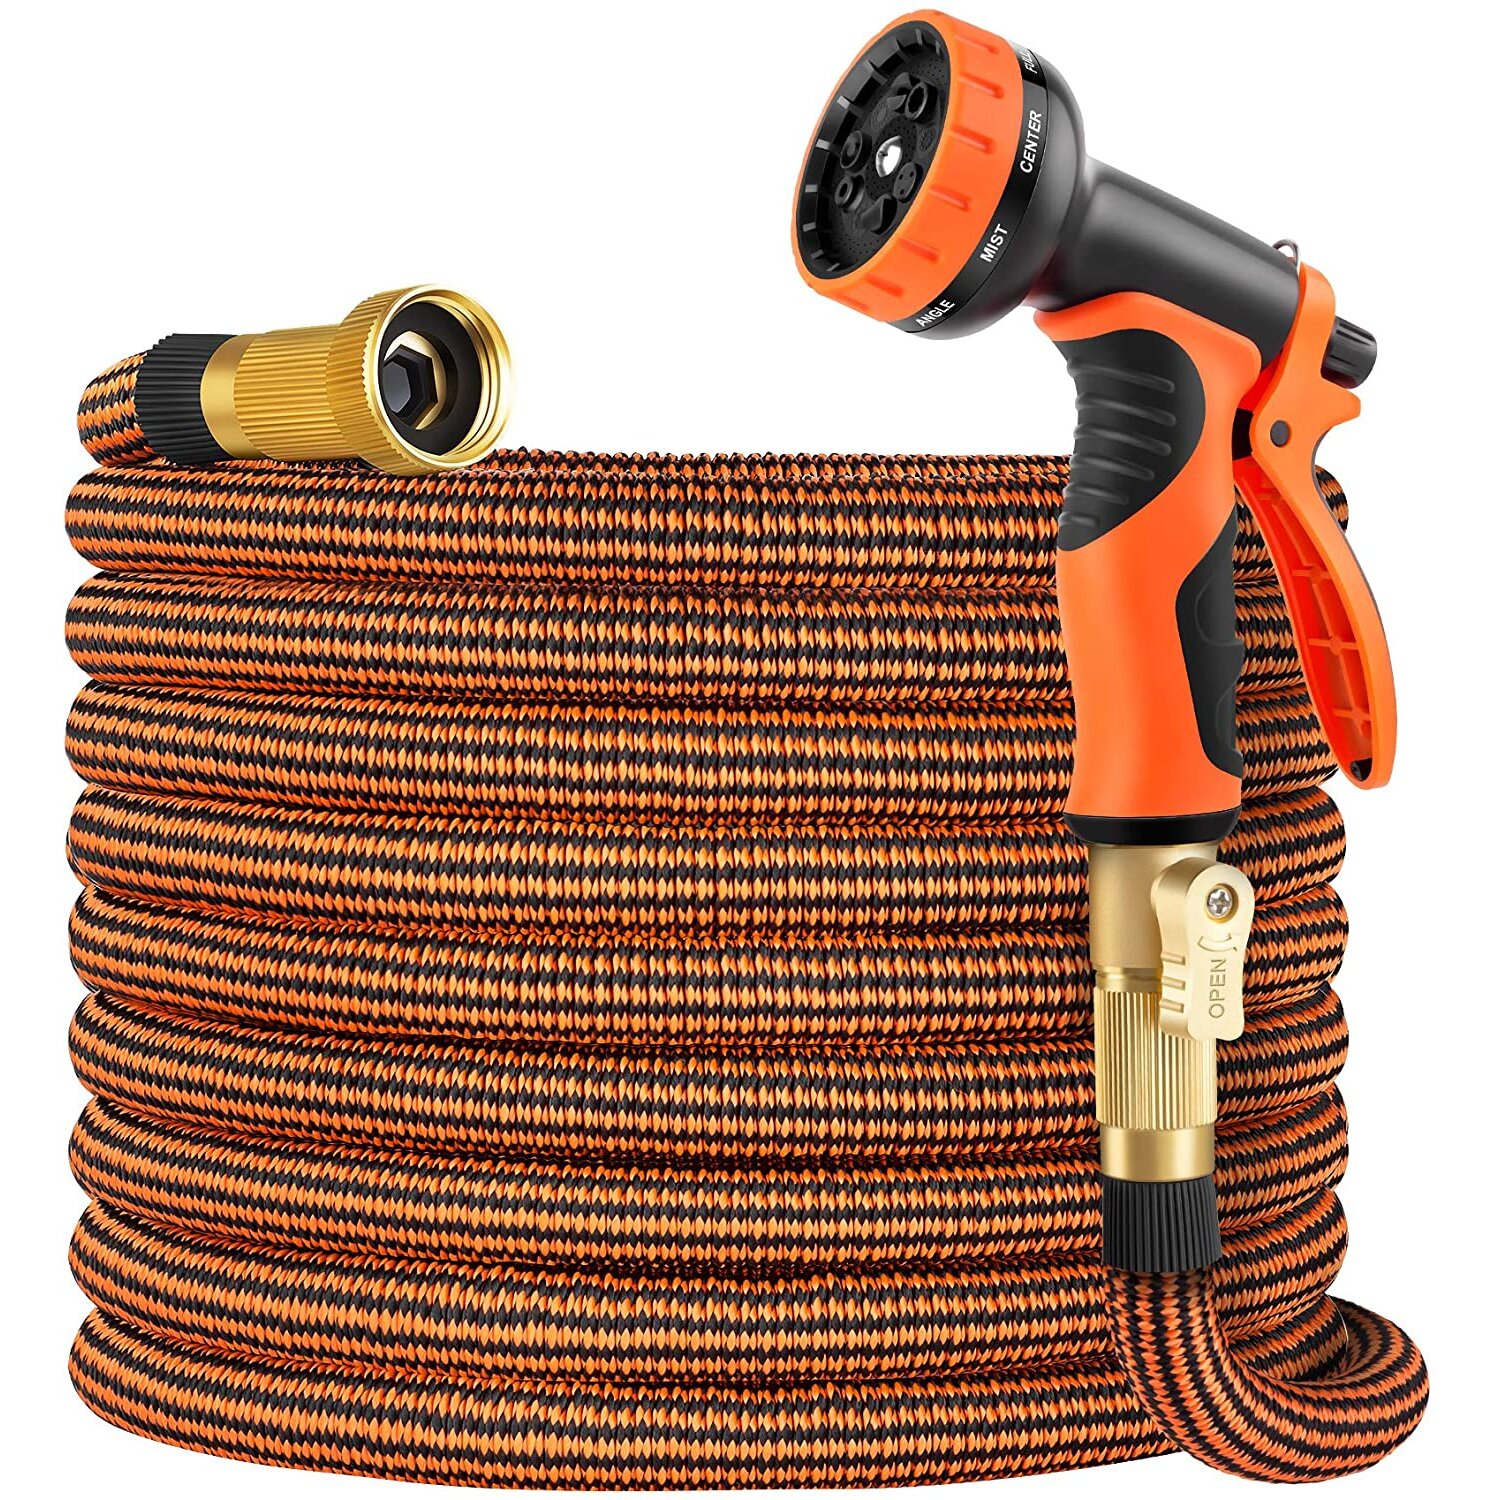 OUTZEST 50ft Expandable Garden Hose, Leakproof Lightweight Water Hose with 9 Functions Sprayer and Super Durable 3750D Fabric, Flexible Hose Pipe